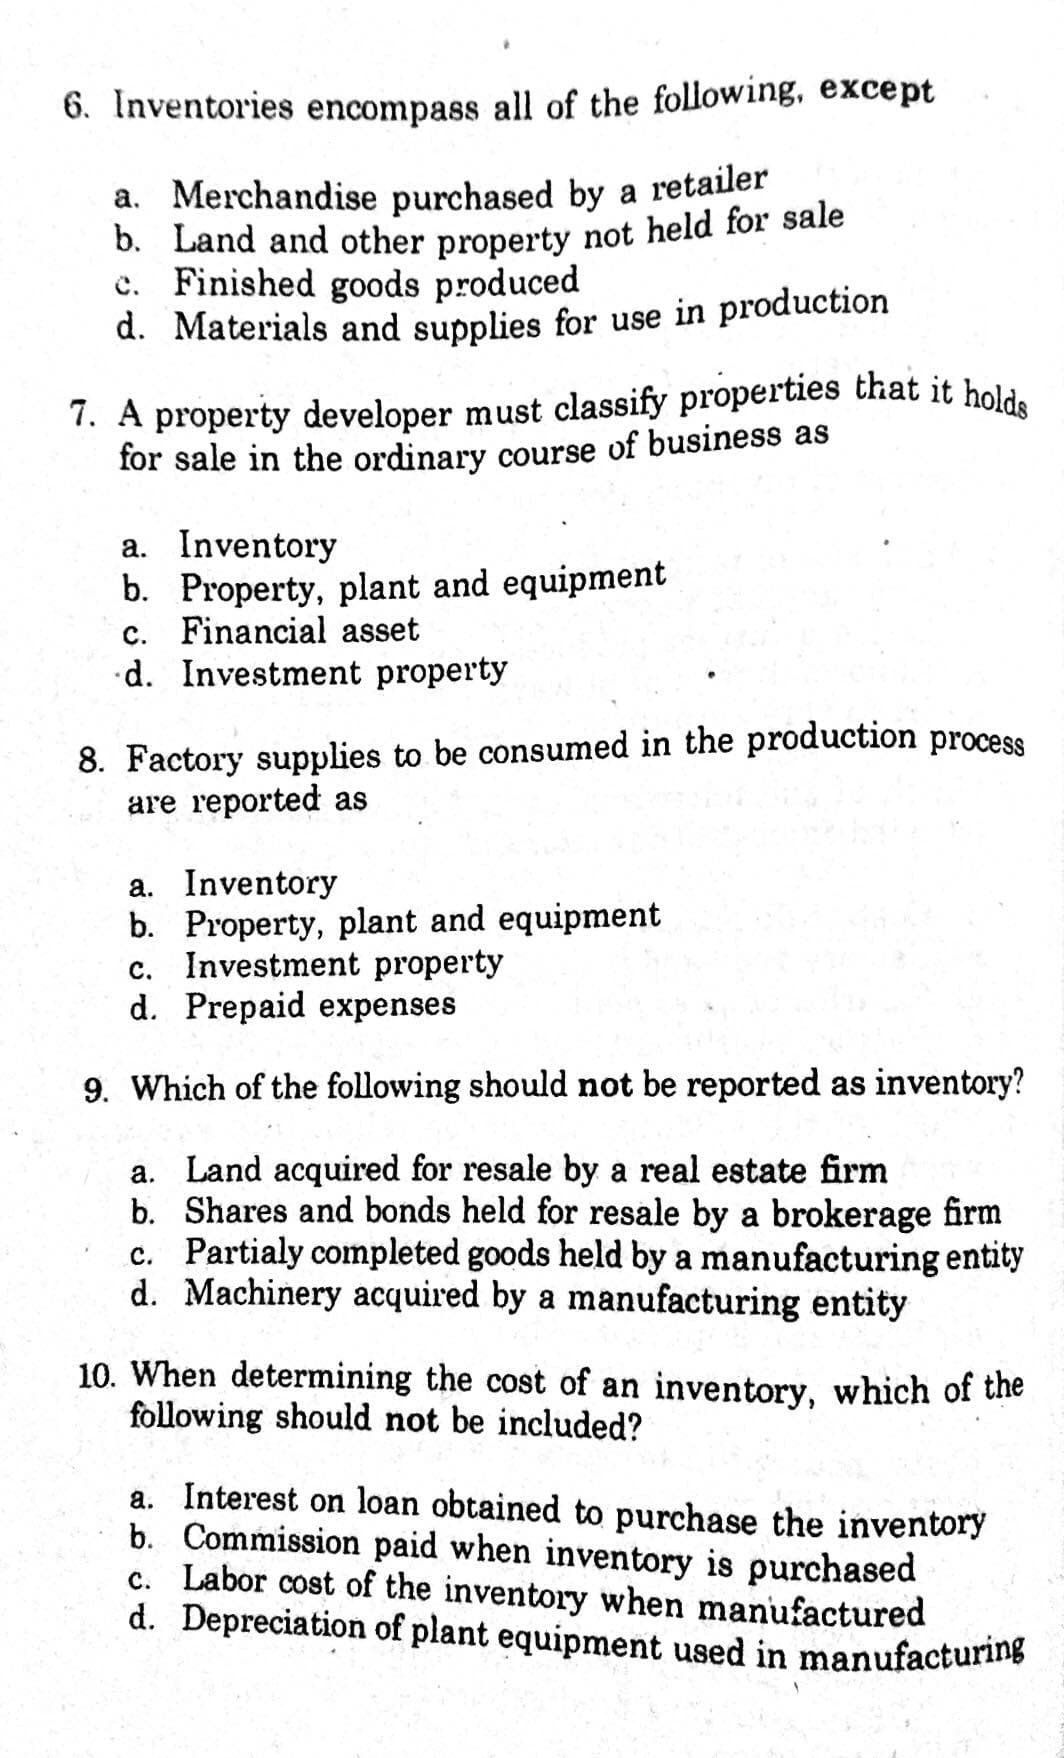 7. A property developer must classify properties that it holds
6. Inventories encompass all of the following, except
a. Merchandise purchased by a retailer
b. Land and other property not held for sale
c. Finished goods produced
d. Materials and supplies for use in production
7. A property developer must classify properties that it hold.
for sale in the ordinary course of business as
a. Inventory
b. Property, plant and equipment
c. Financial asset
•d. Investment property
8. Factory supplies to be consumed in the production process
are reported as
a. Inventory
b. Property, plant and equipment
c. Investment property
d. Prepaid expenses
9. Which of the following should not be reported as inventory?
a. Land acquired for resale by a real estate firm
b. Shares and bonds held for resale by a brokerage firm
c. Partialy completed goods held by a manufacturing entity
d. Machinery acquired by a manufacturing entity
10. When determining the cost of an inventory, which of the
following should not be included?
a. Interest on loan obtained to purchase the inventory
b. Commission paid when inventory is purchased
c. Labor cost of the inventory when manufactured
d. Depreciation of plant equipment used in manufacturing
